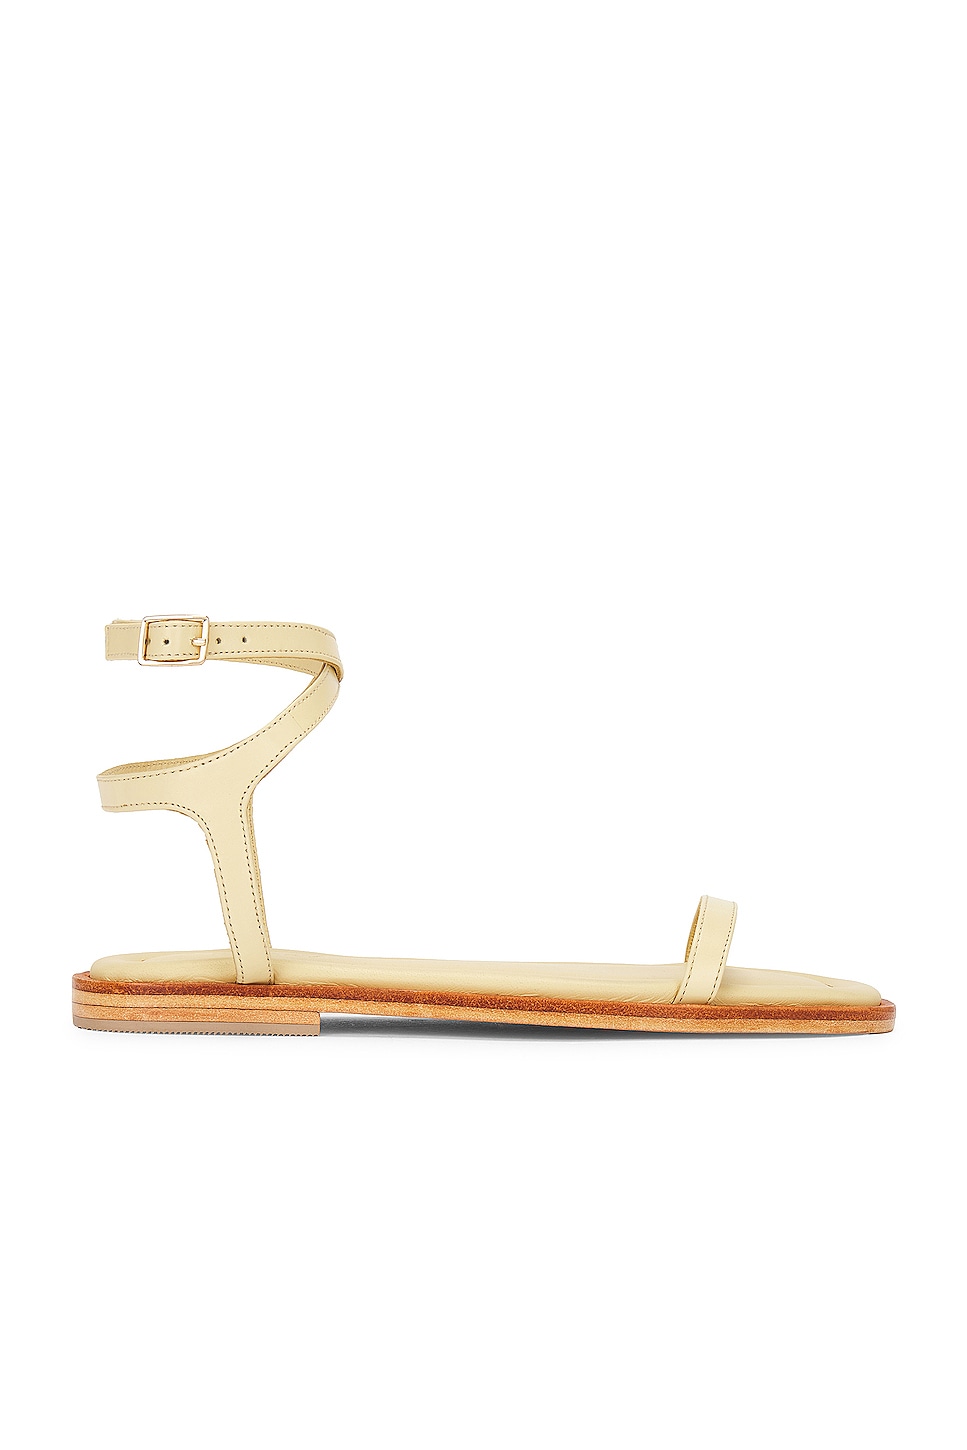 Image 1 of A.EMERY Viv Sandal in Buttermilk